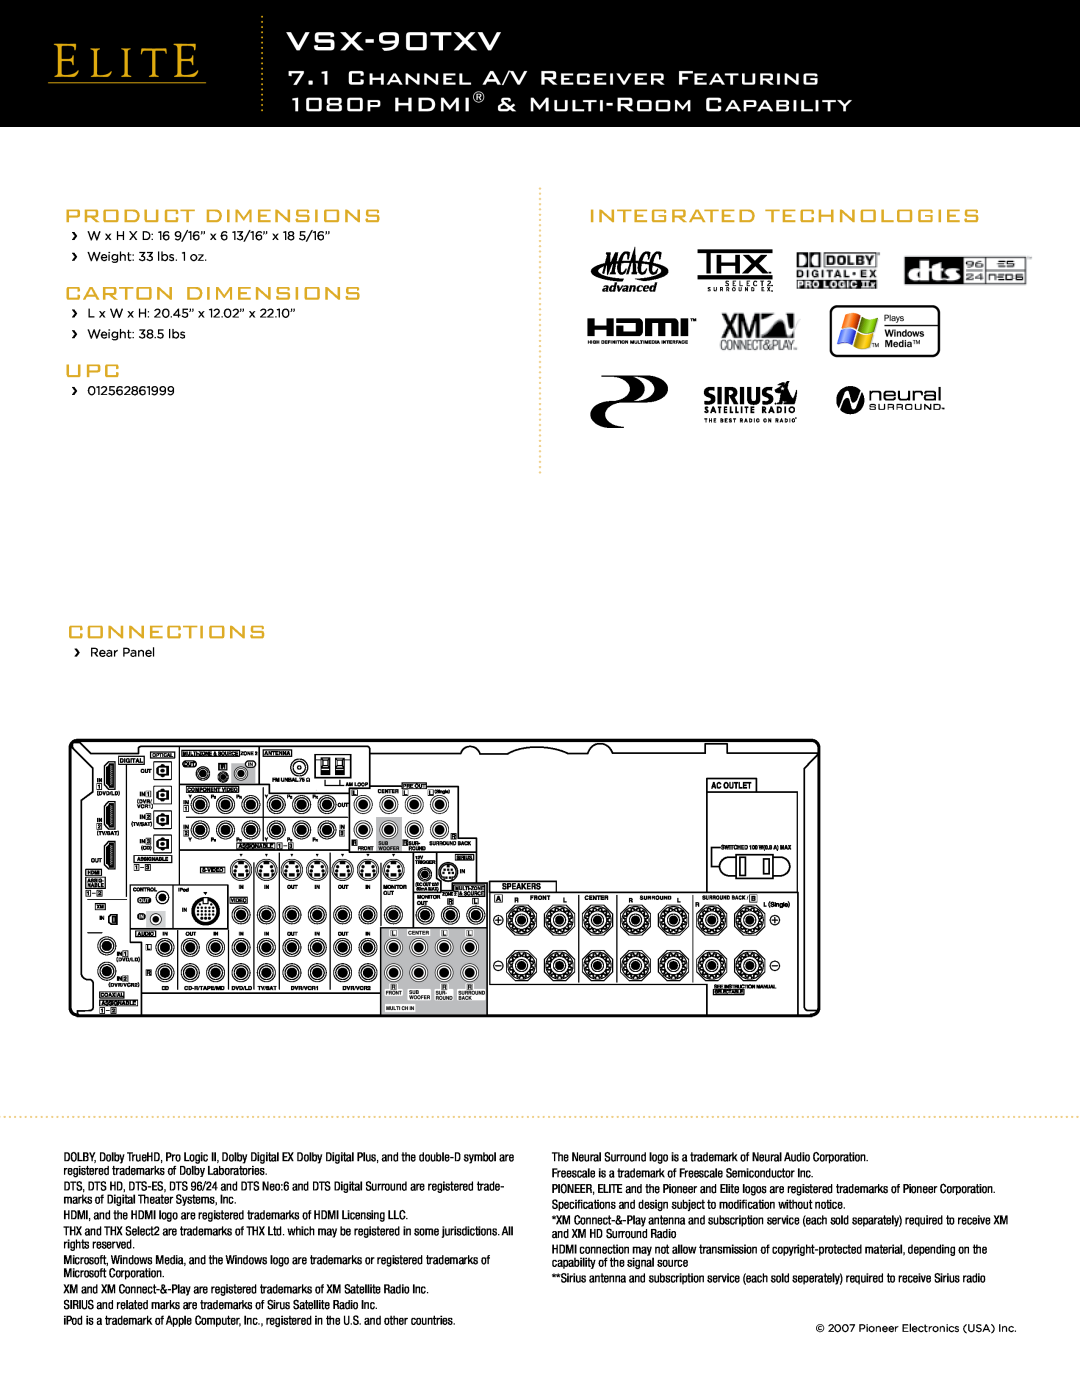 Elite VSX-90TXV manual Product Dimensions, Integrated Technologies, Carton Dimensions, Connections 